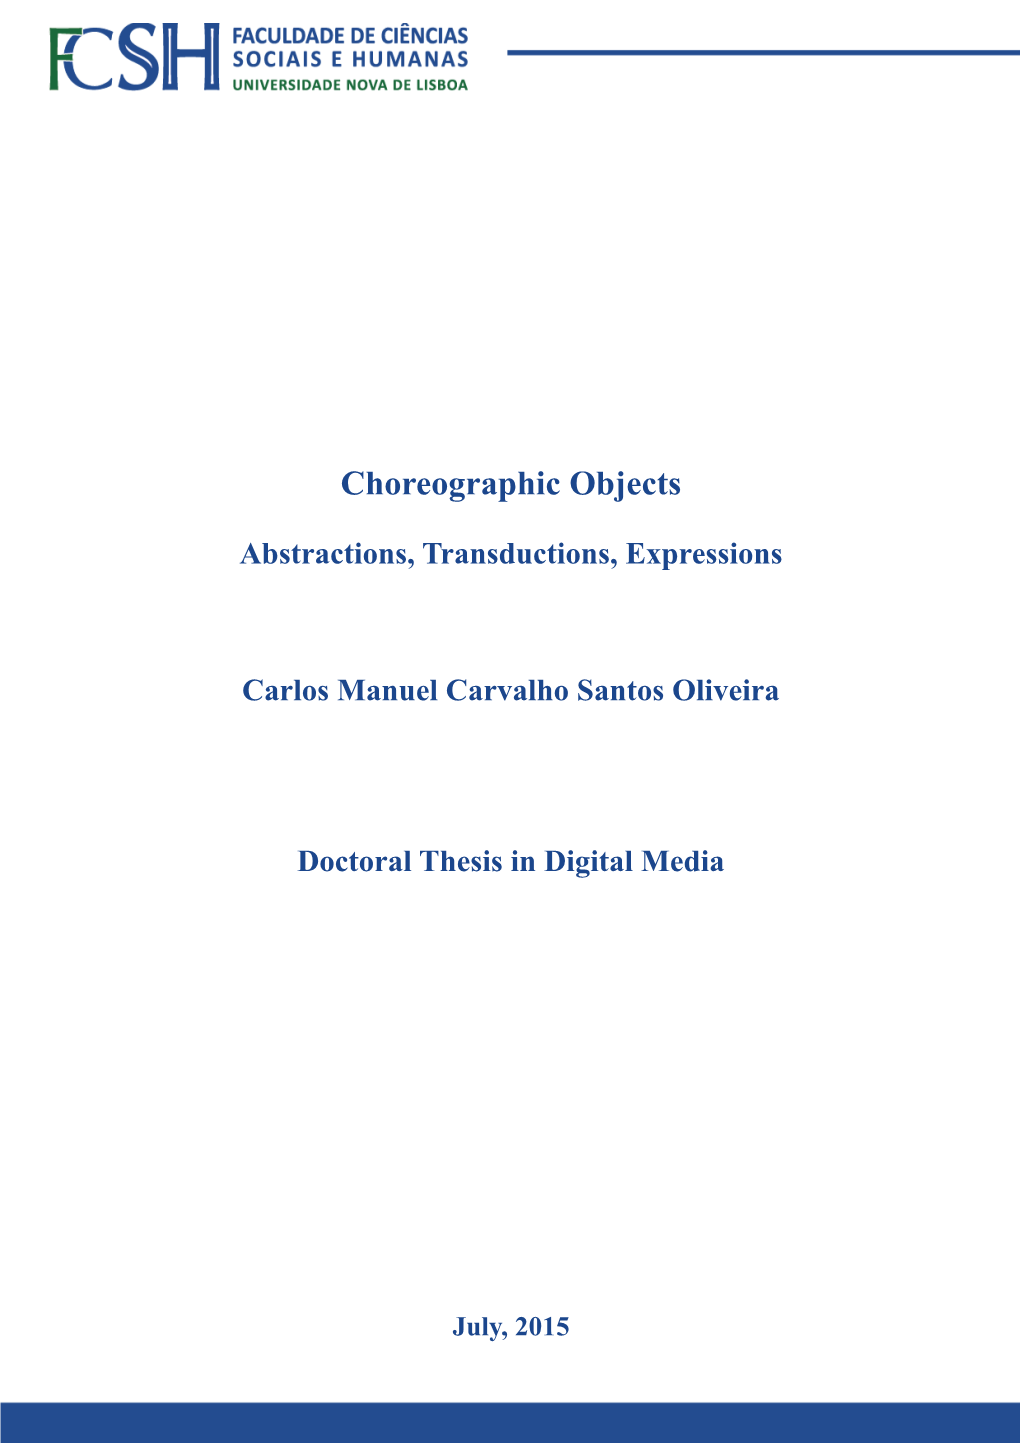 Abstractions, Transductions, Expressions Carlos Manuel Carvalho Santos Oliveira Doctoral Thesis in Digital Media